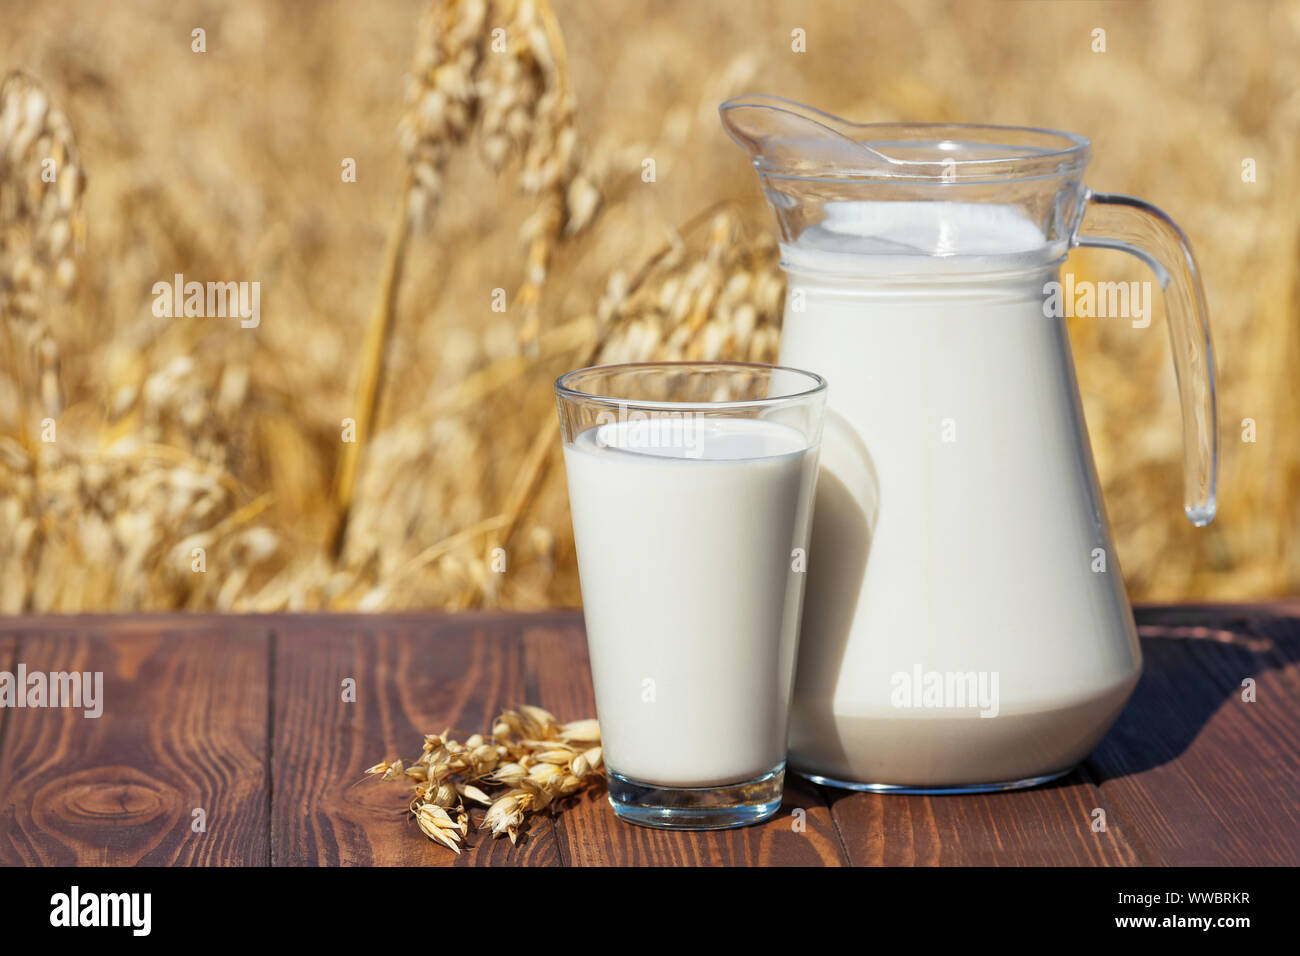 vegan oat milk in glass and jug on table over against ripe cereal field Stock Photo